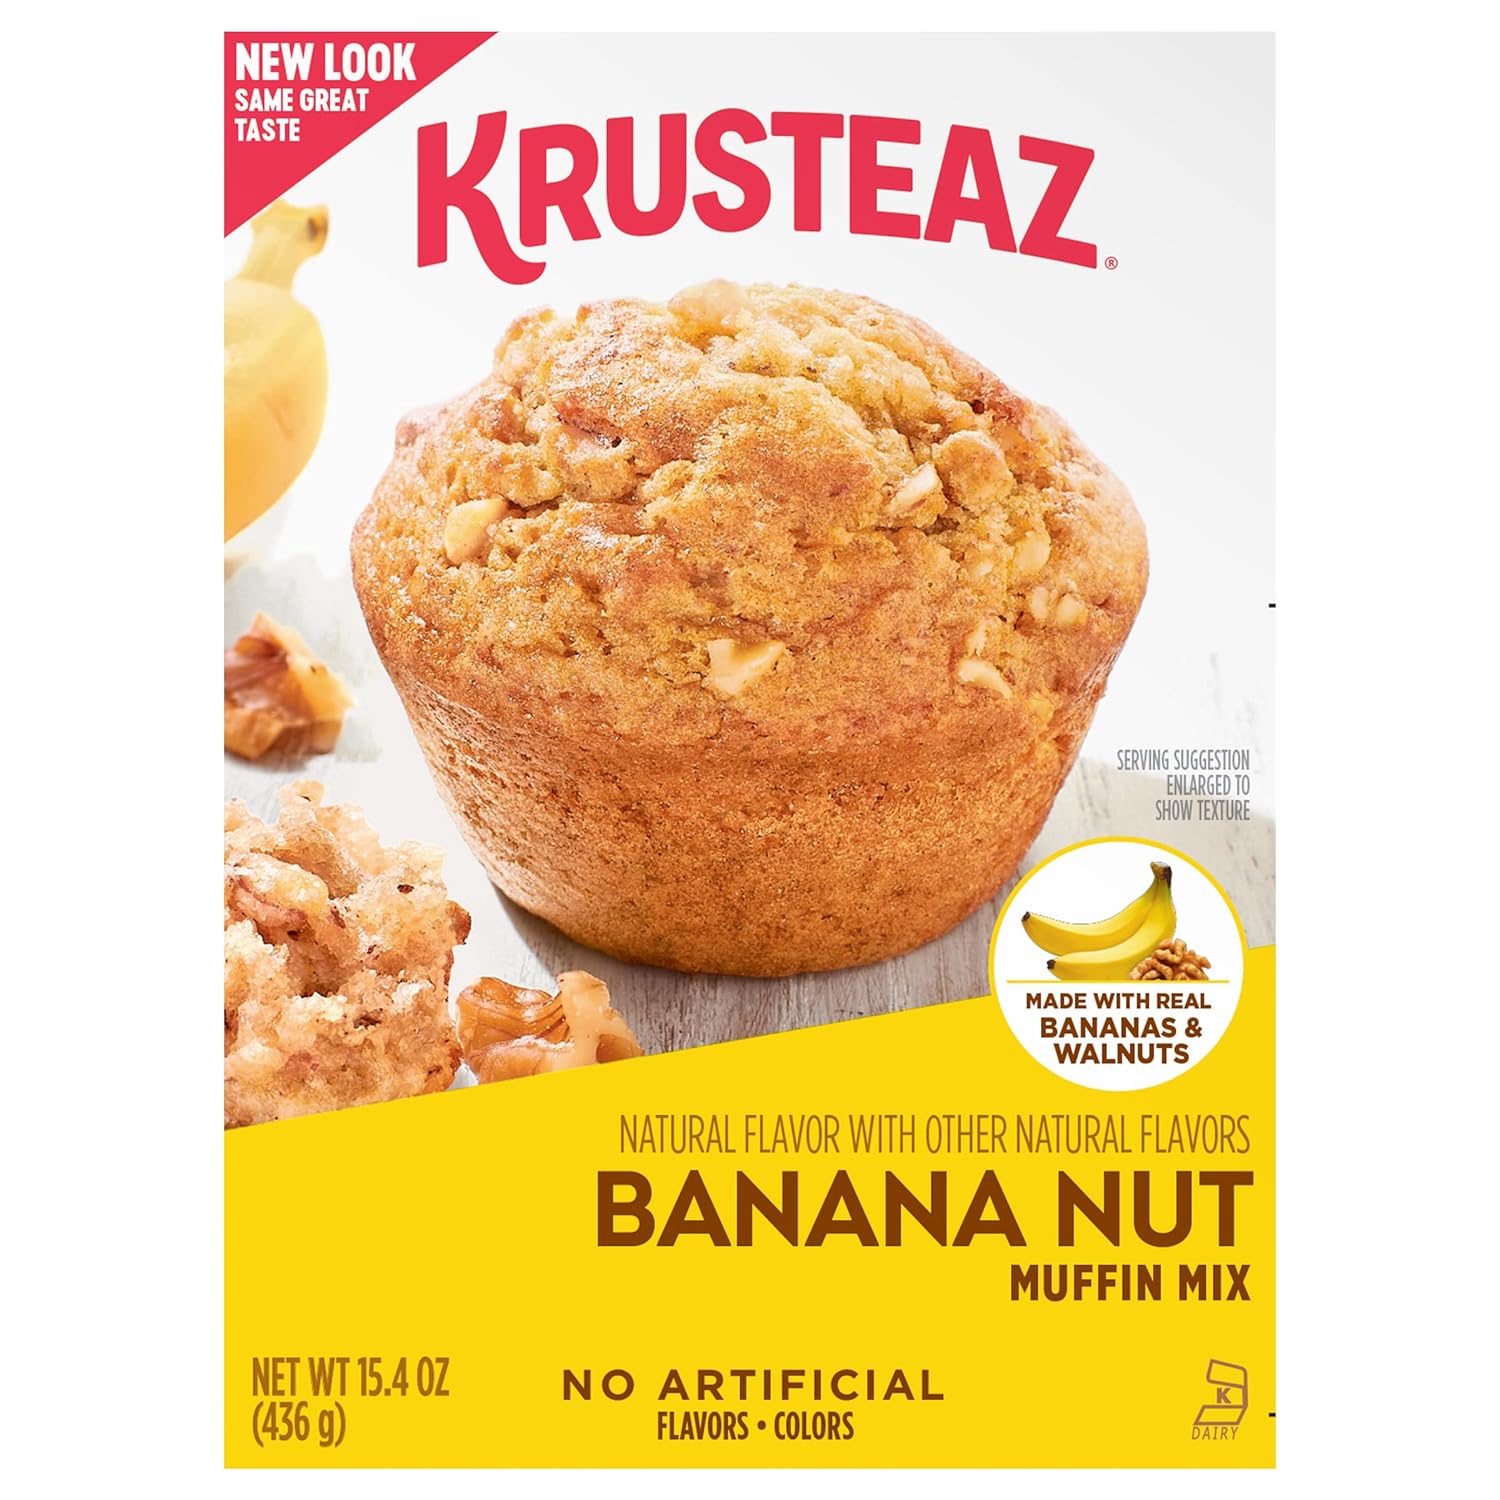 Krusteaz Banana Nut Muffin Mix, Made with Real Bananas & Walnuts, Baking Mix, No Artificial Flavors or Colors, 15.4-ounce Boxes (Pack of 12)